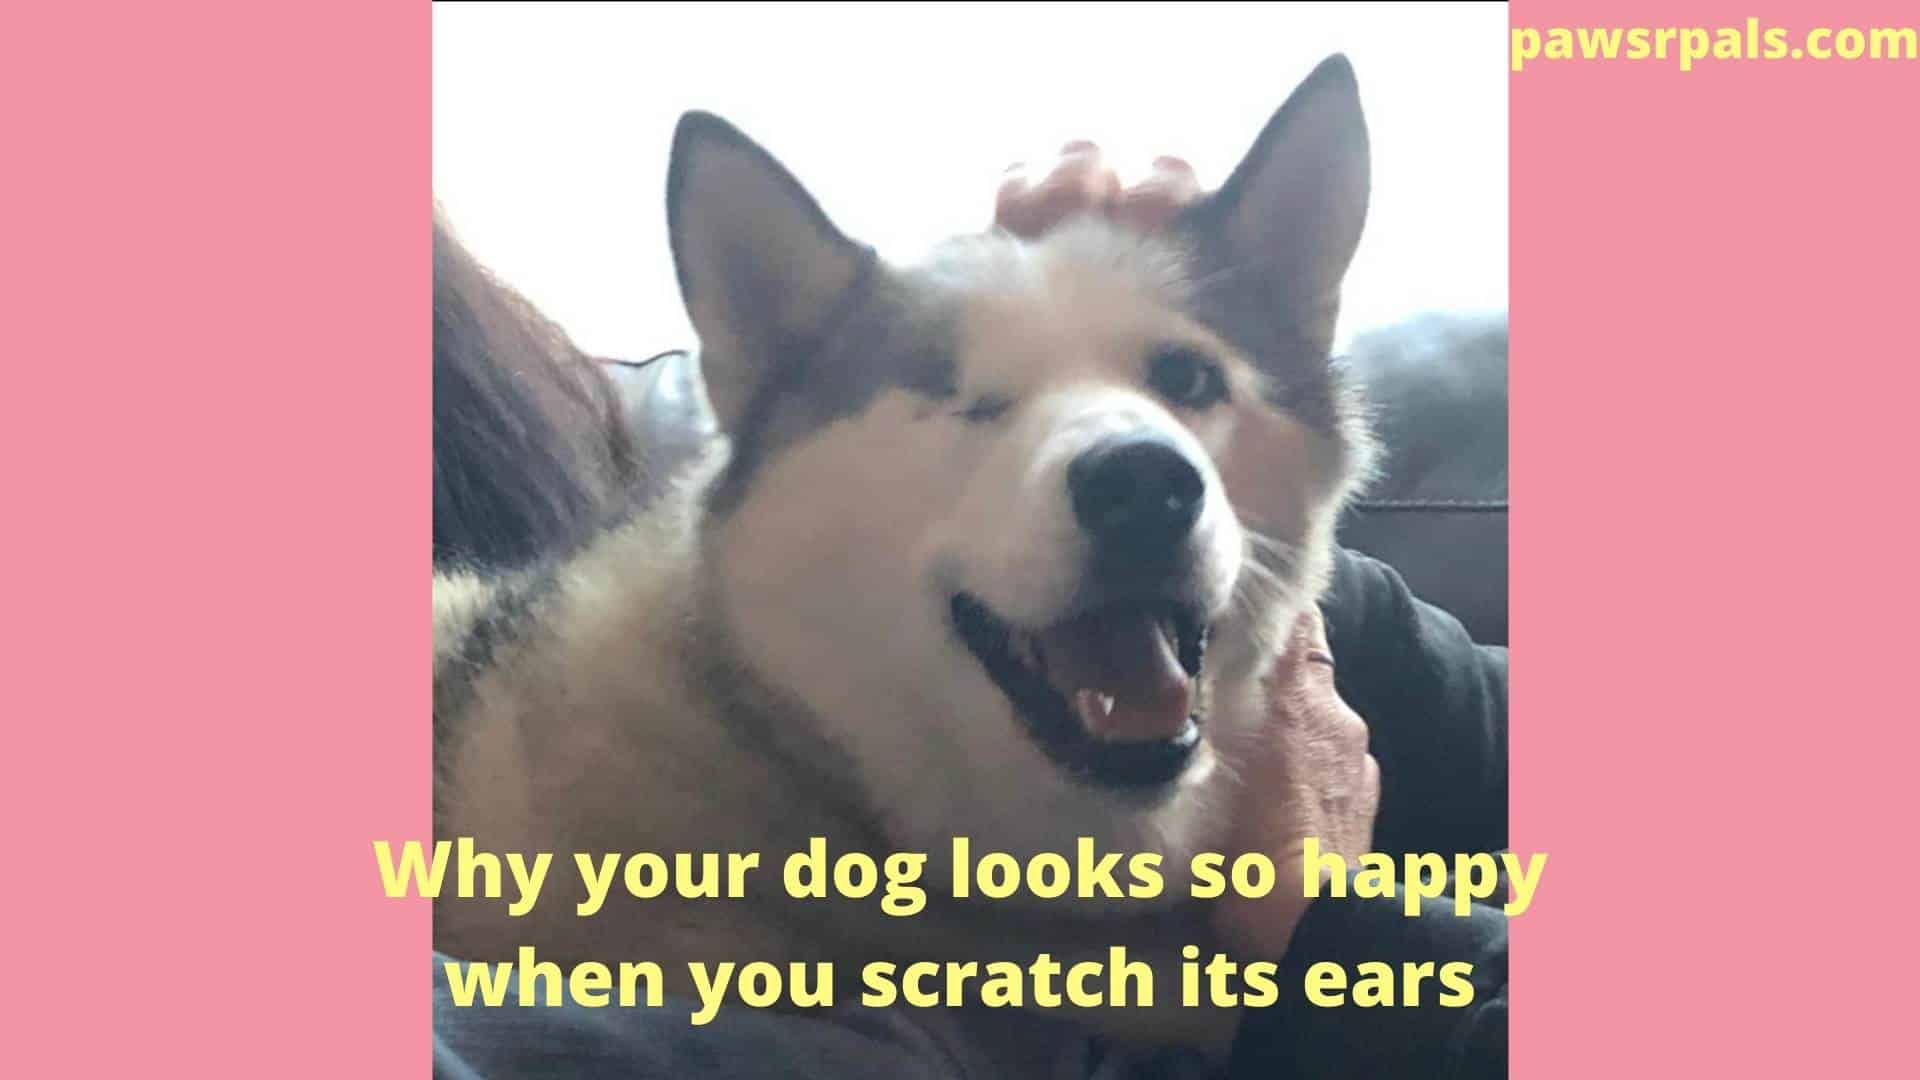 Why your dog looks so happy when you scratch its ears